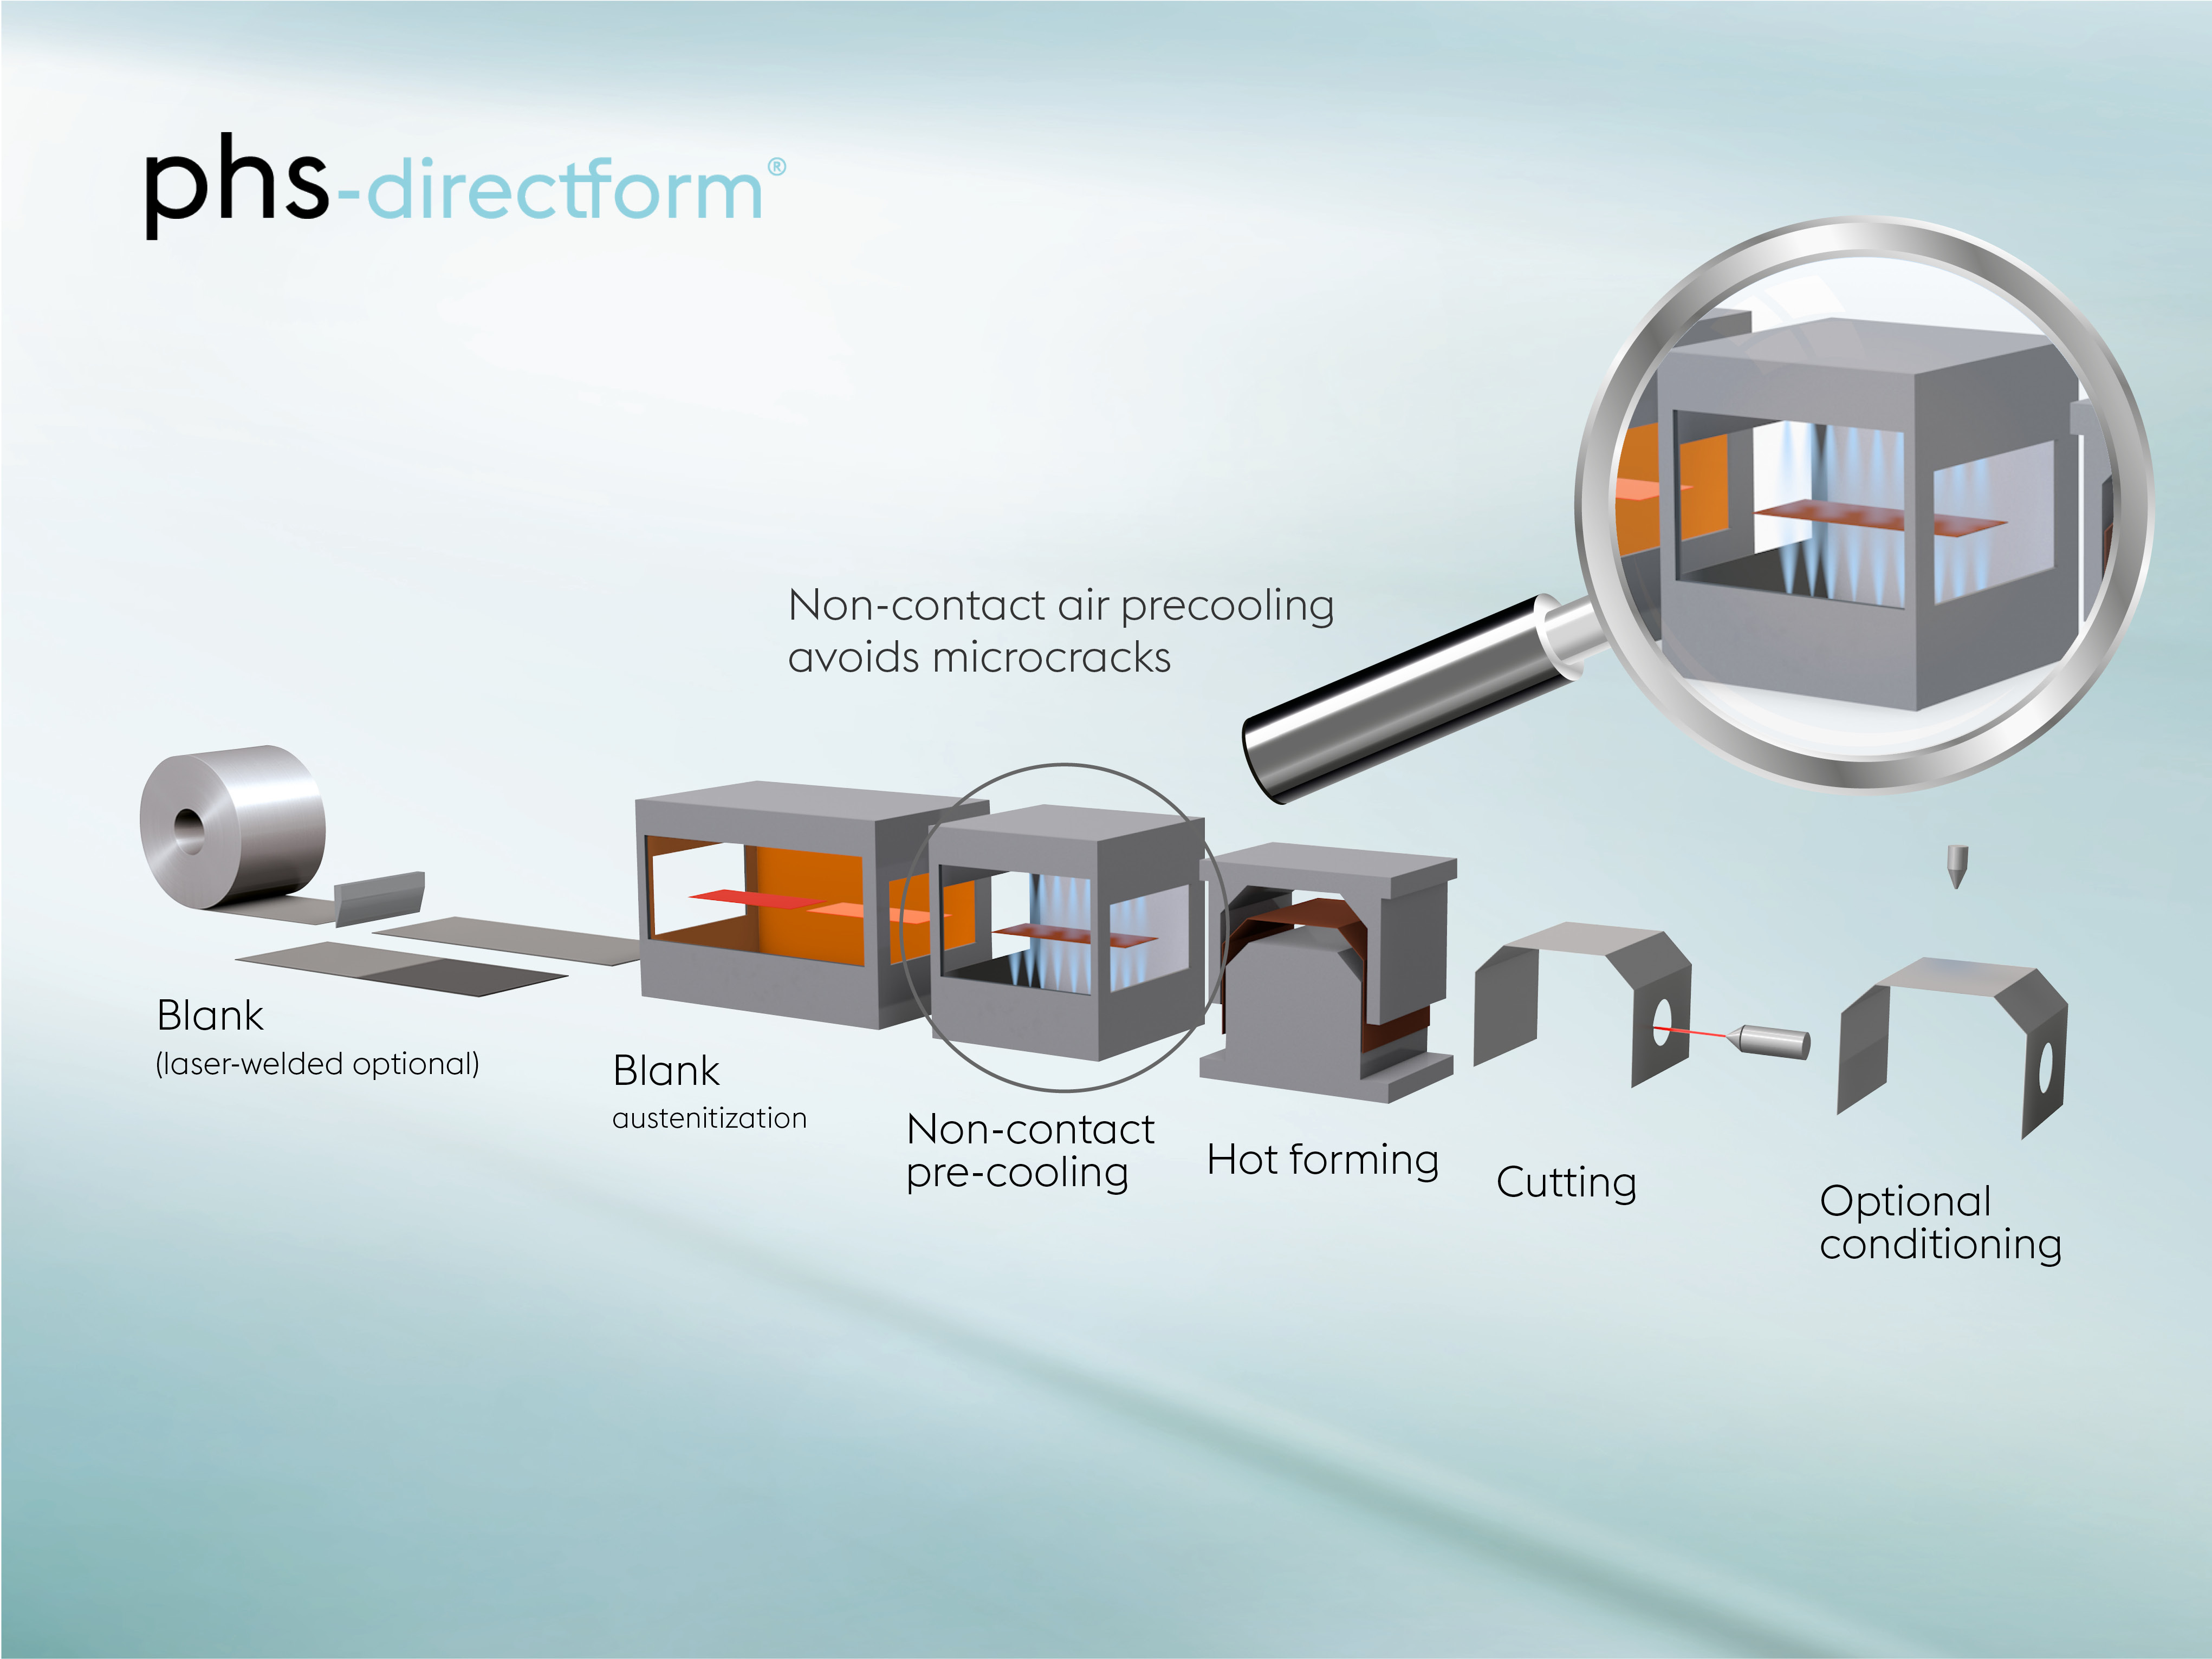 phs-directform® for press-hardened components produced using direct hot forming material